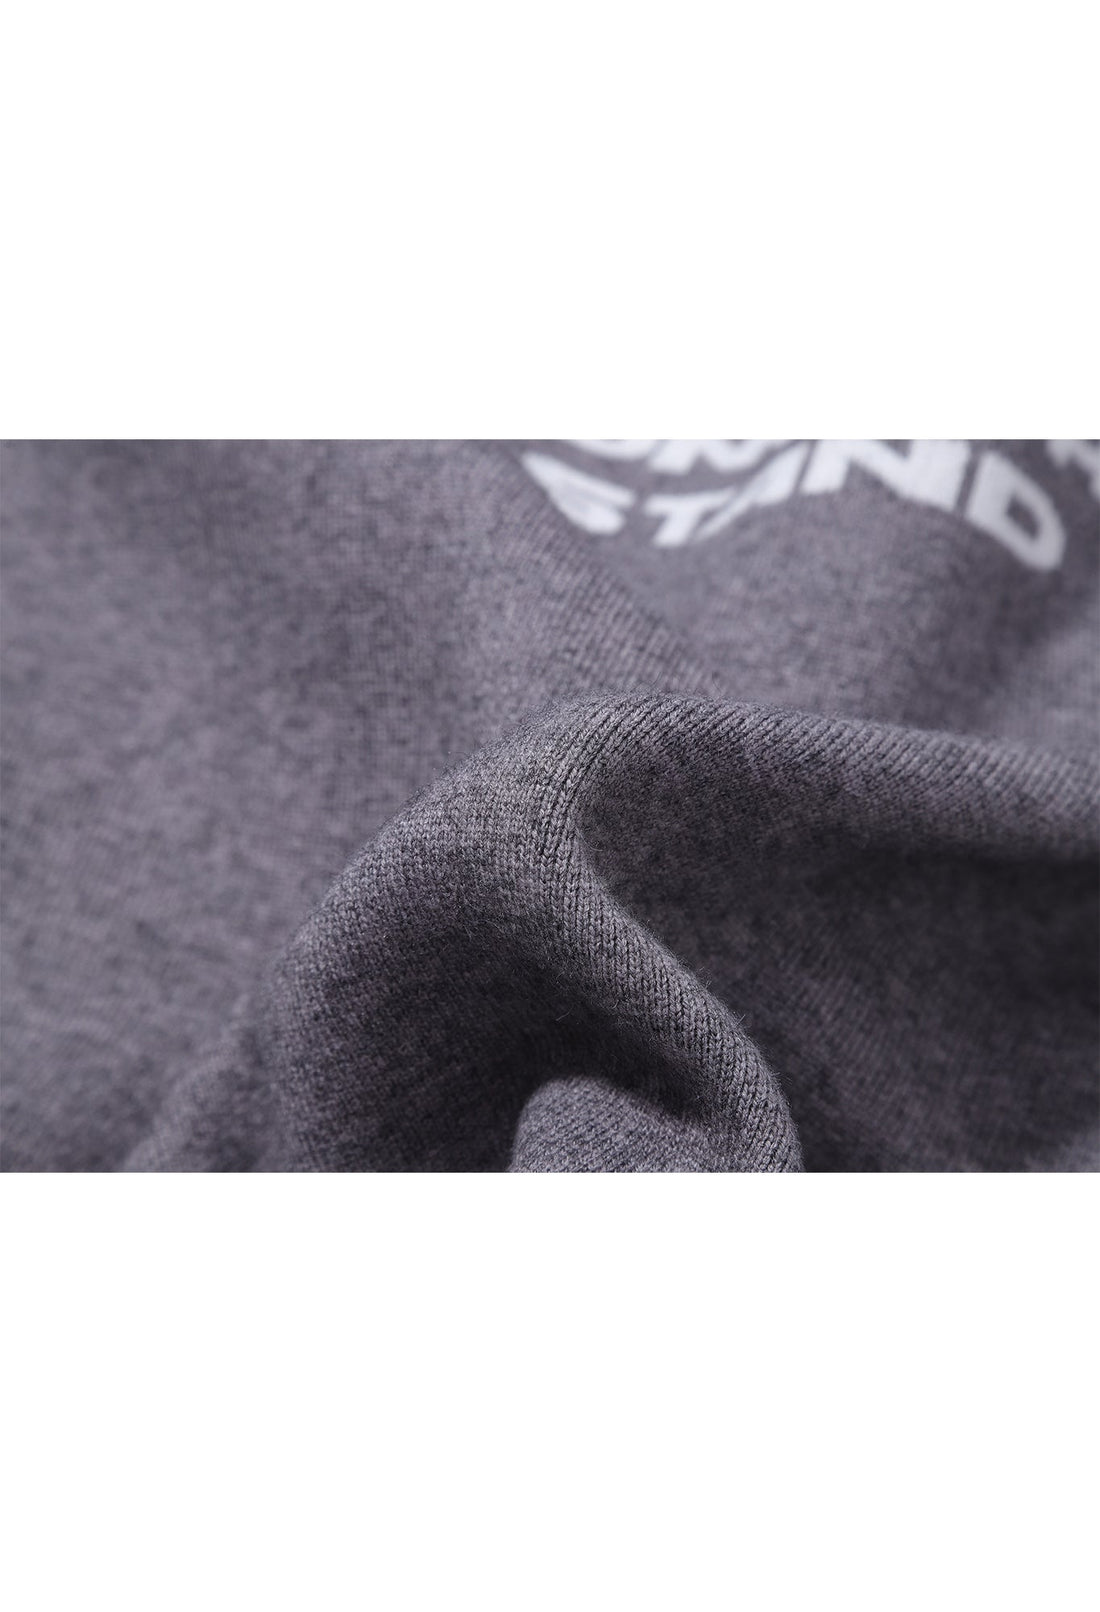 MOTTO SWEATER GREY Acupuncture